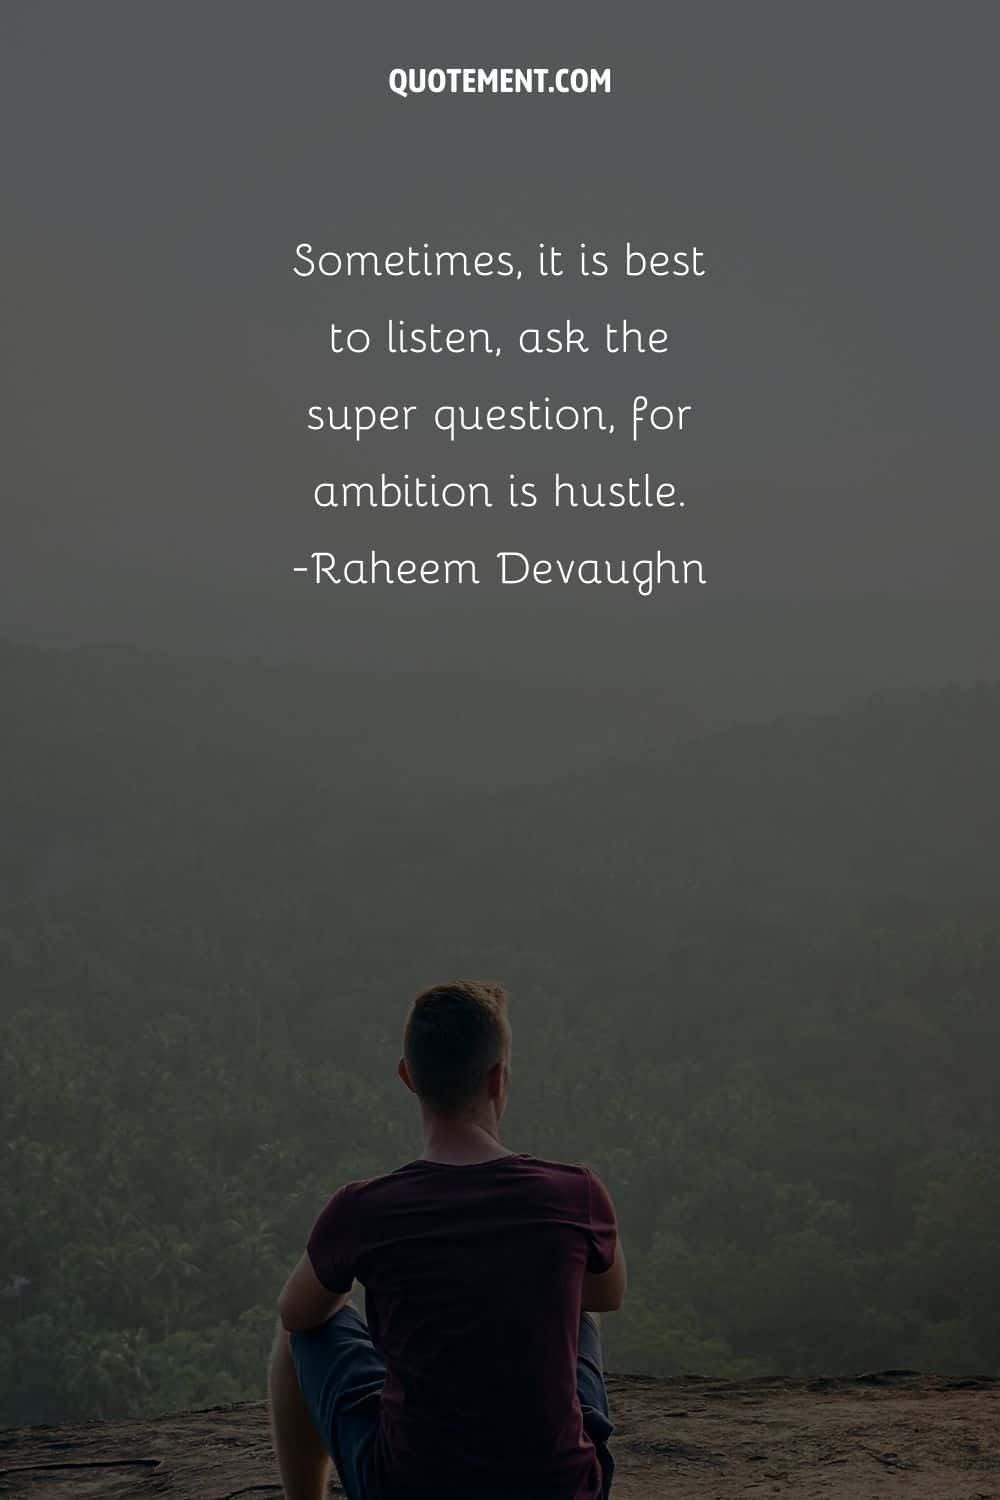 Sometimes, it is best to listen, ask the super question, for ambition is hustle